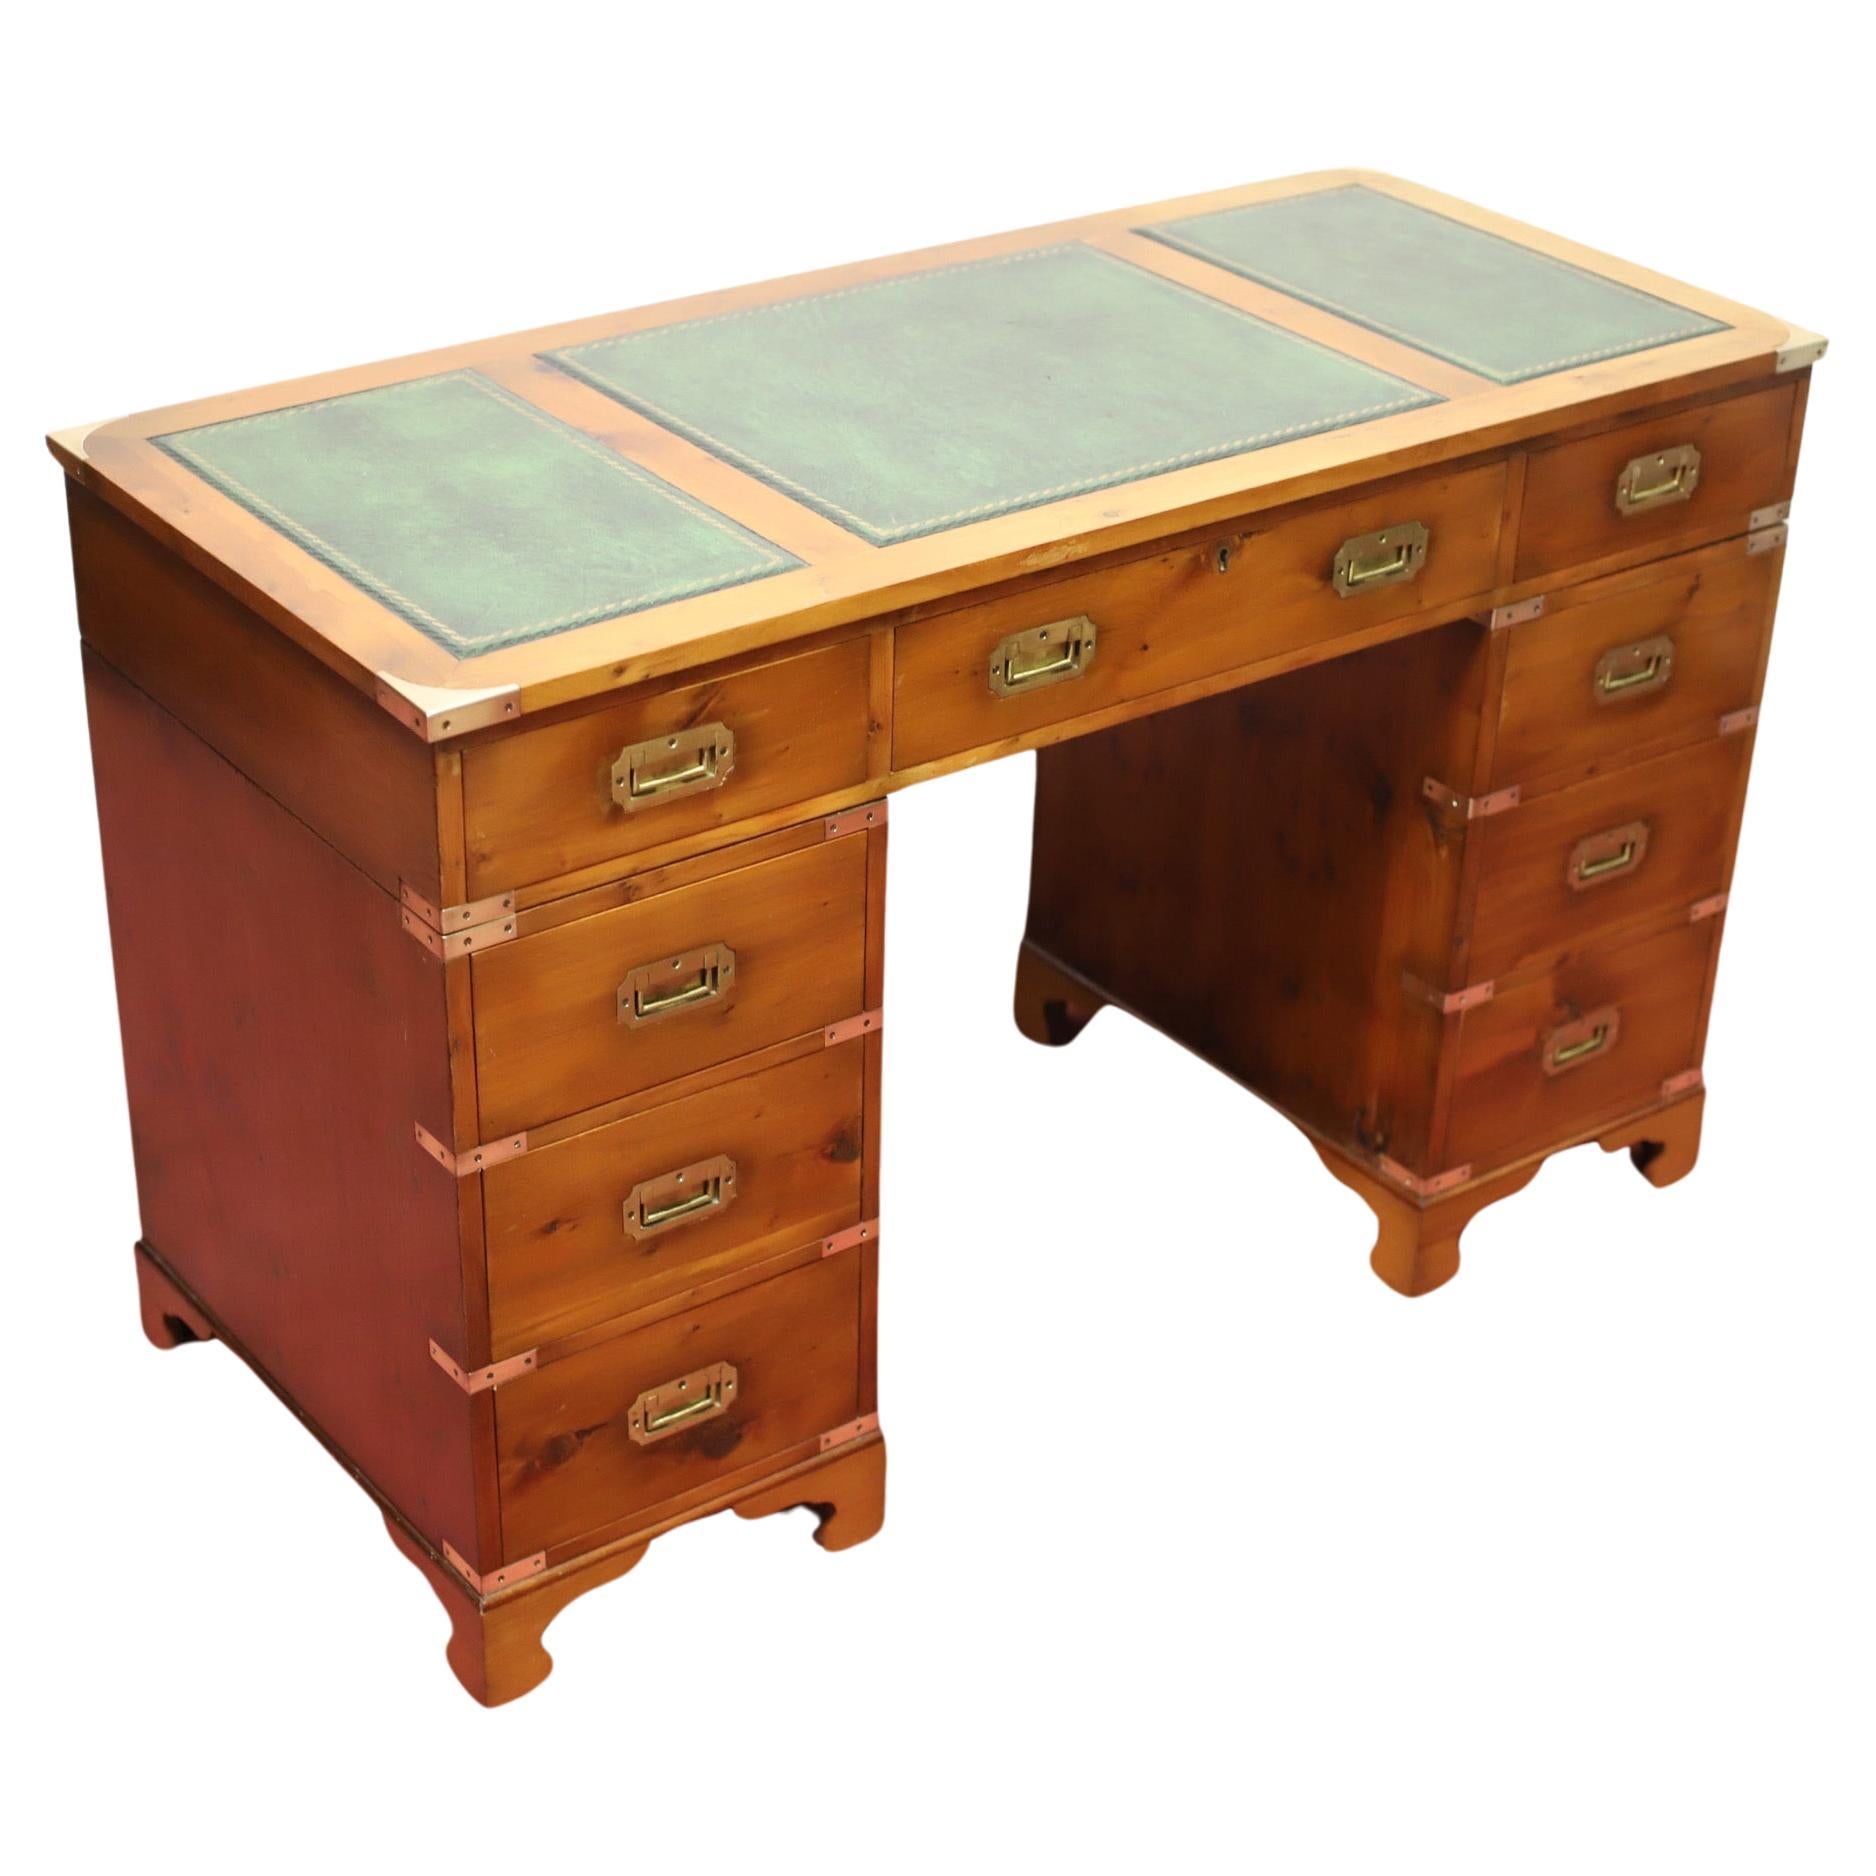 Lovely Yew Wood Military Campaign Twin Pedestal Desk 